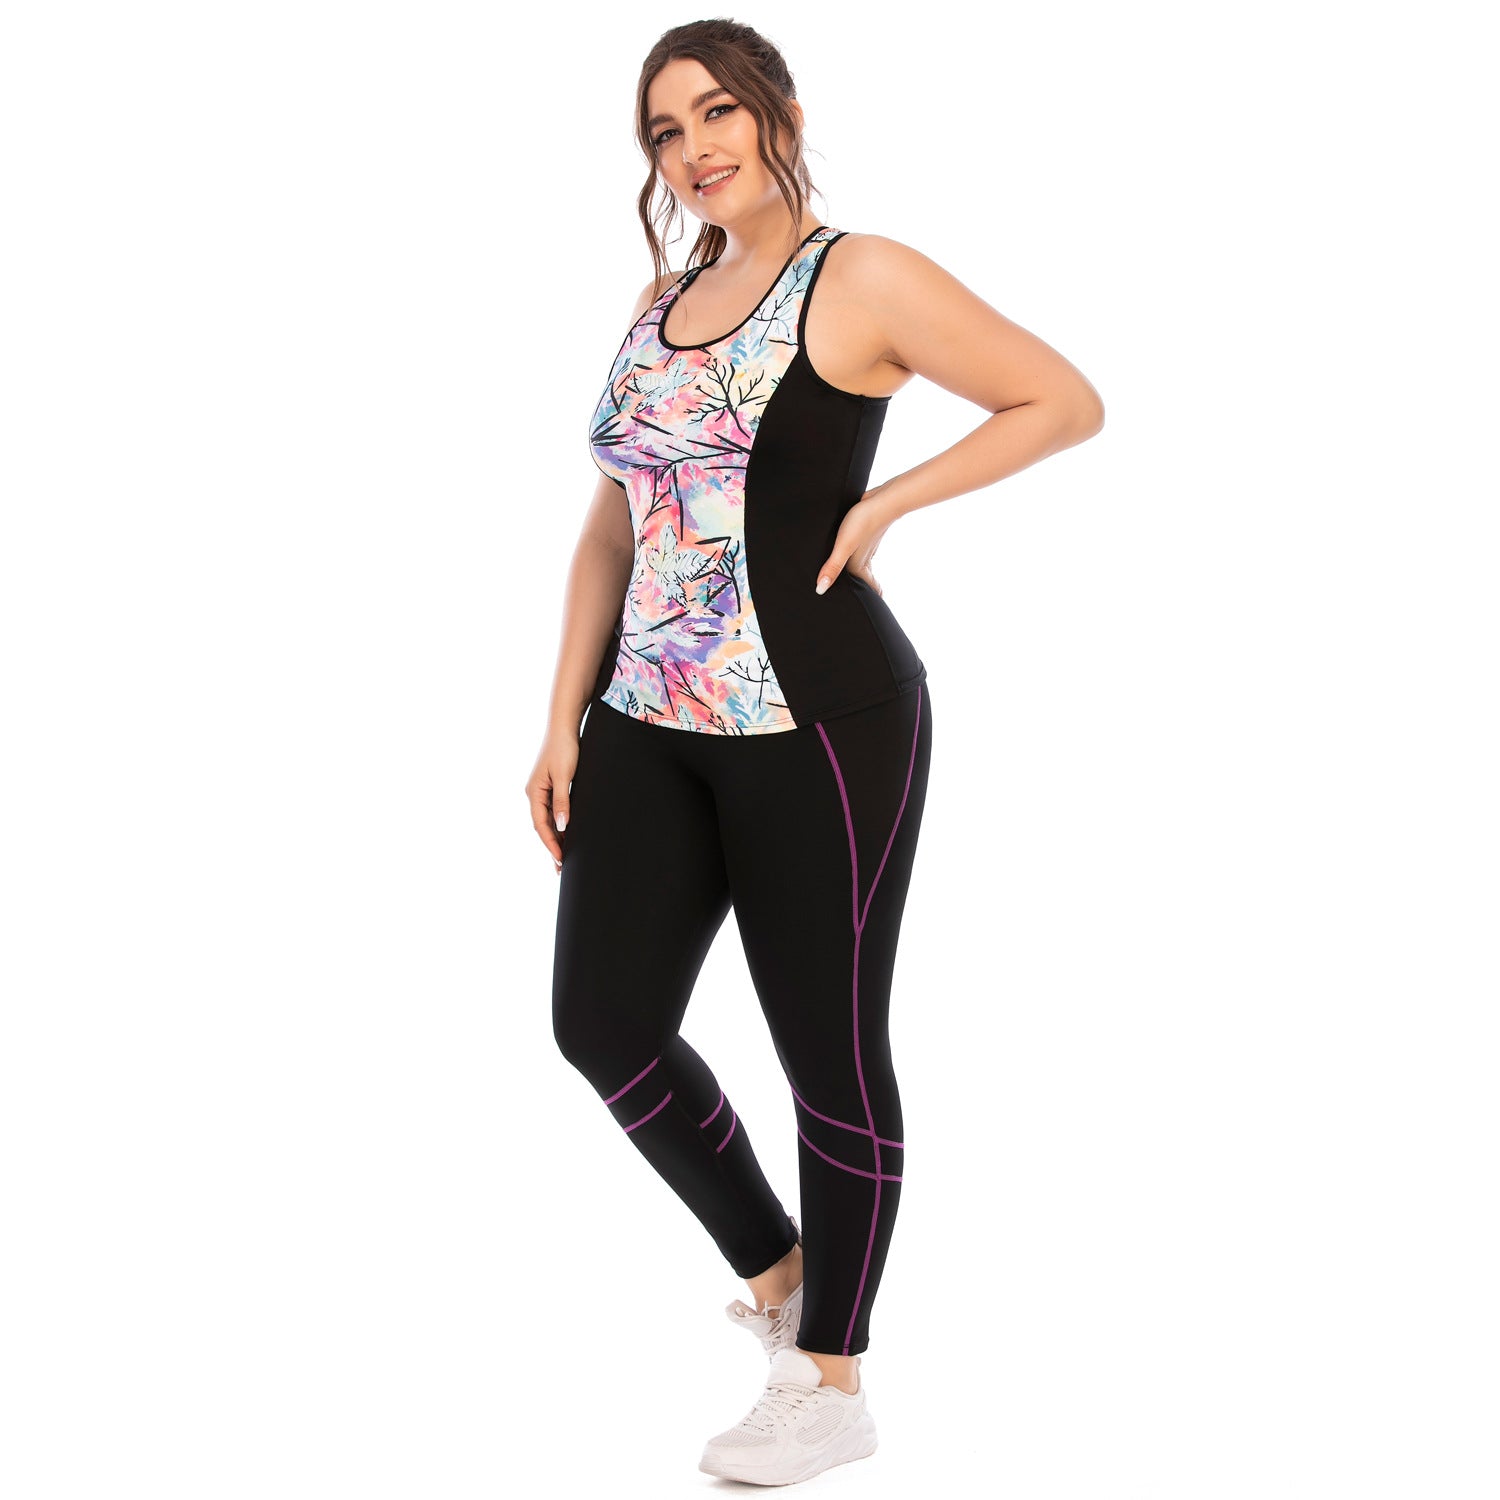 Workout Yoga Suit Plus Size - High Impact Coffee